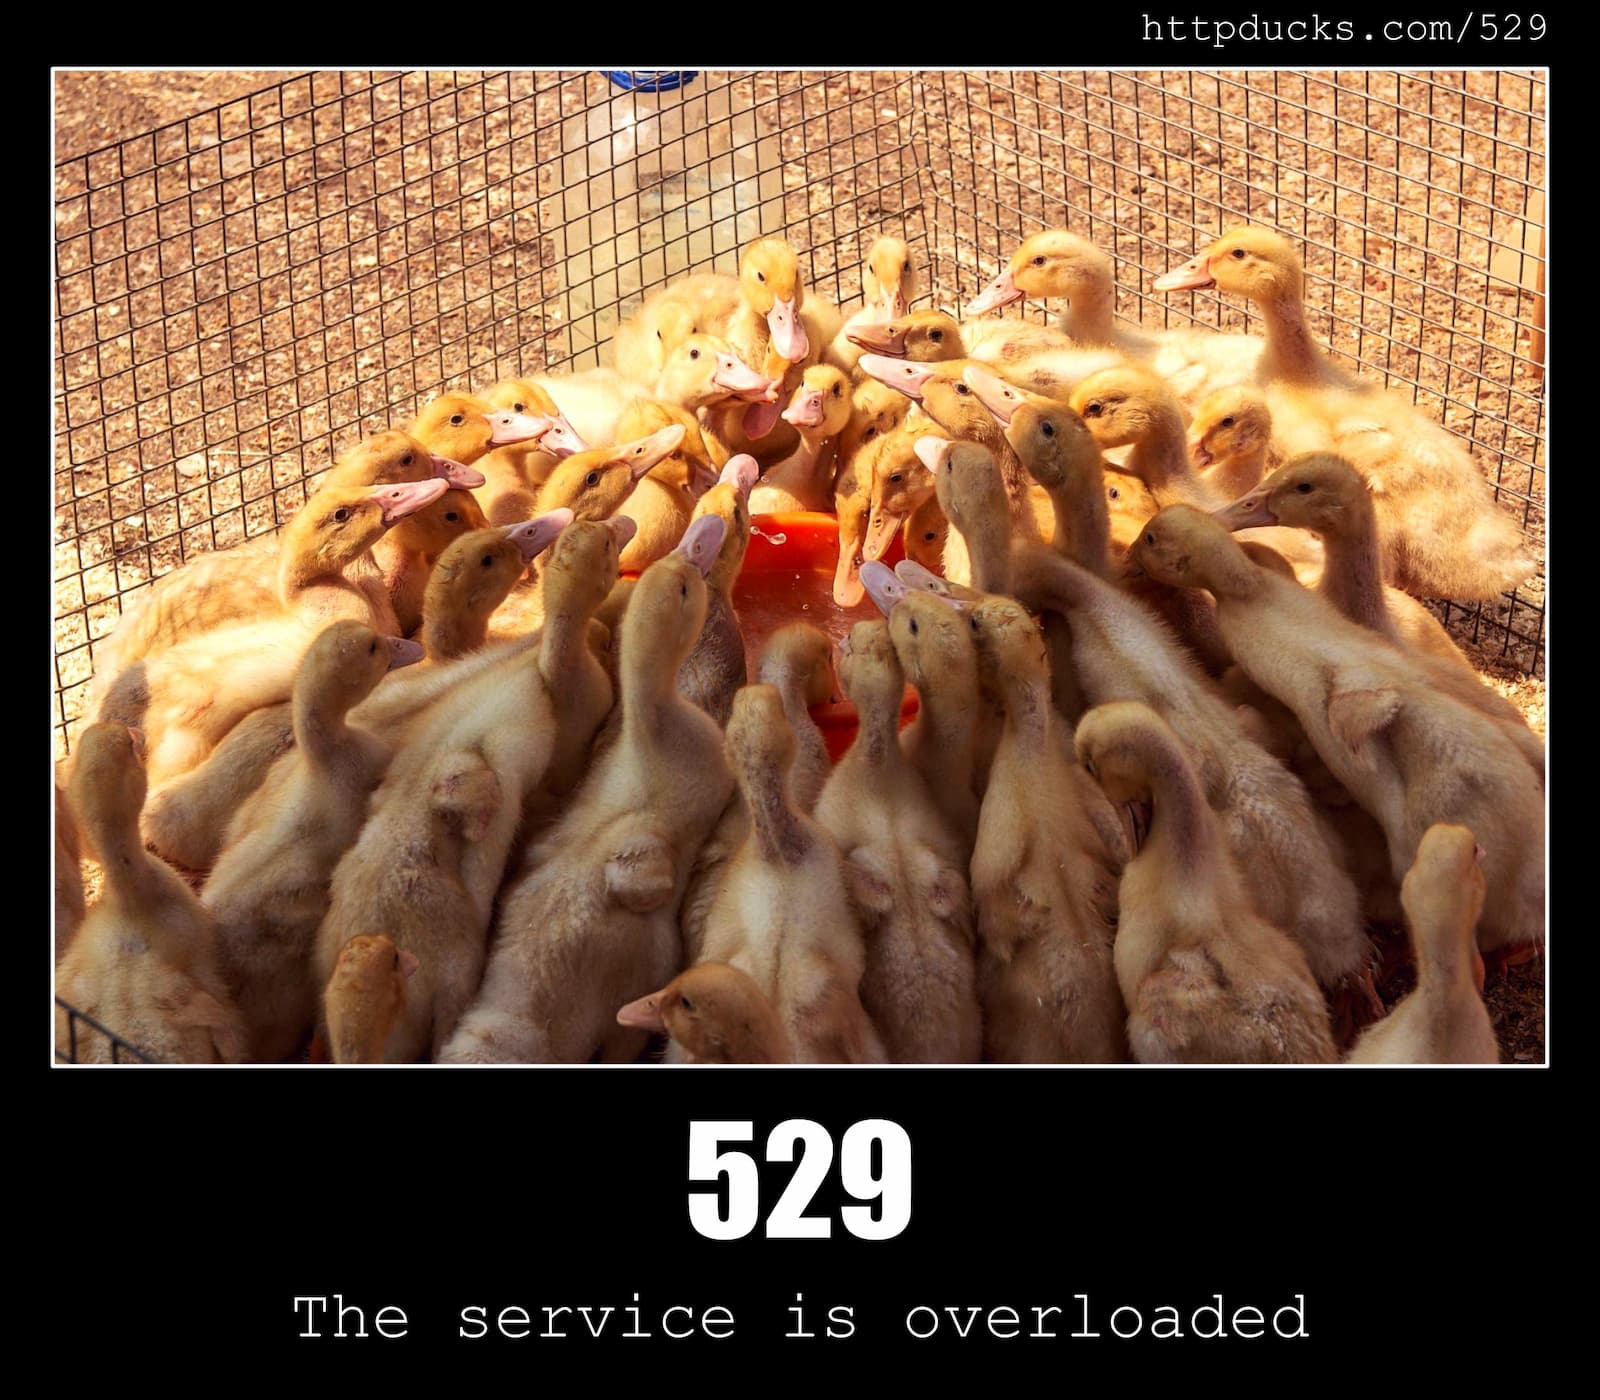 HTTP Status Code 529 The service is overloaded & Ducks